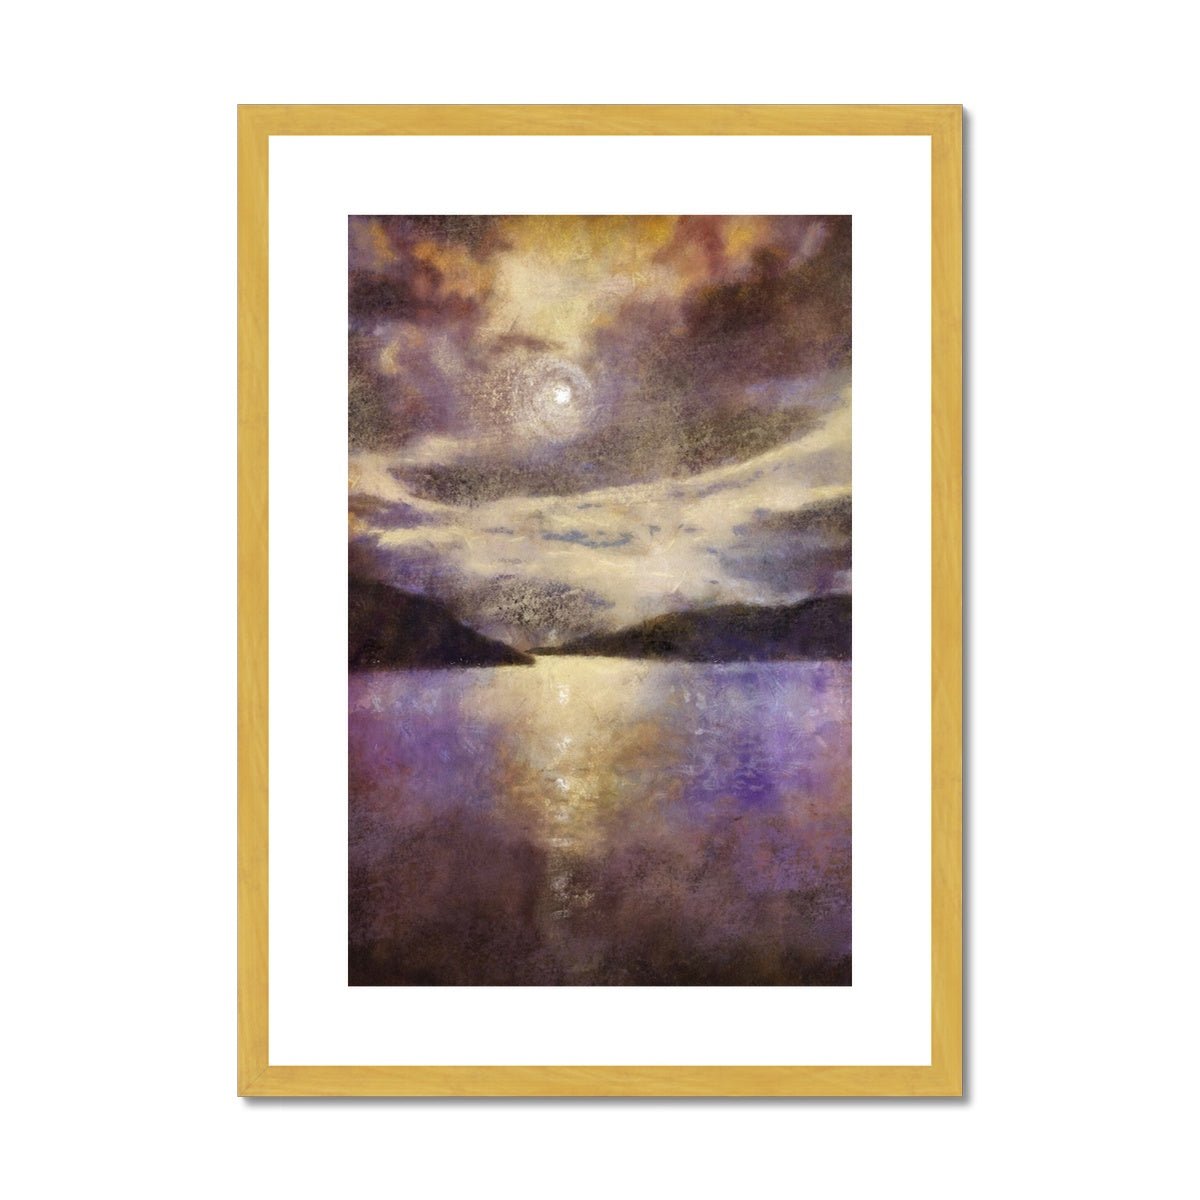 Moonlight Meets Lewis & Harris Painting | Antique Framed & Mounted Prints From Scotland-Antique Framed & Mounted Prints-Hebridean Islands Art Gallery-A2 Portrait-Gold Frame-Paintings, Prints, Homeware, Art Gifts From Scotland By Scottish Artist Kevin Hunter